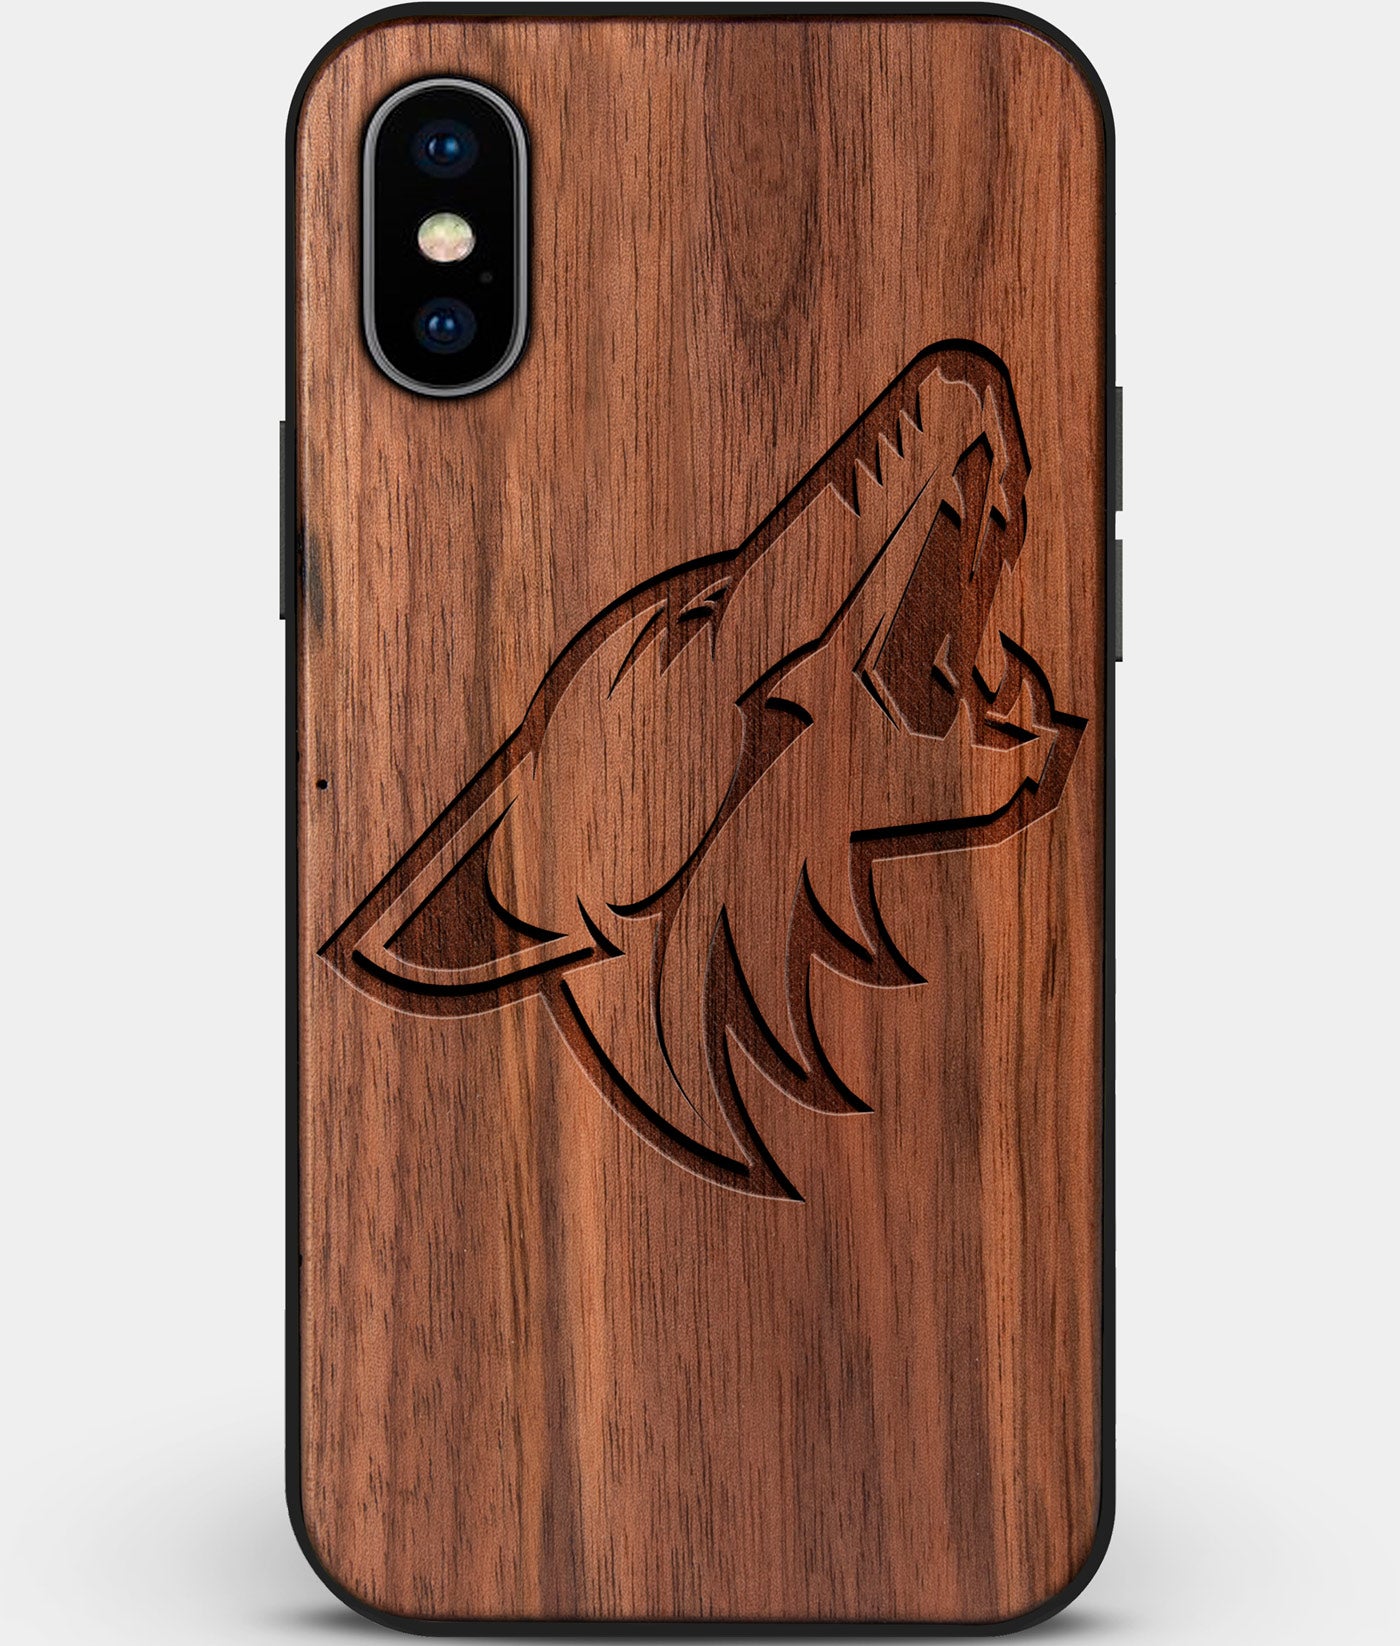 Custom Carved Wood Arizona Coyotes iPhone X/XS Case | Personalized Walnut Wood Arizona Coyotes Cover, Birthday Gift, Gifts For Him, Monogrammed Gift For Fan | by Engraved In Nature